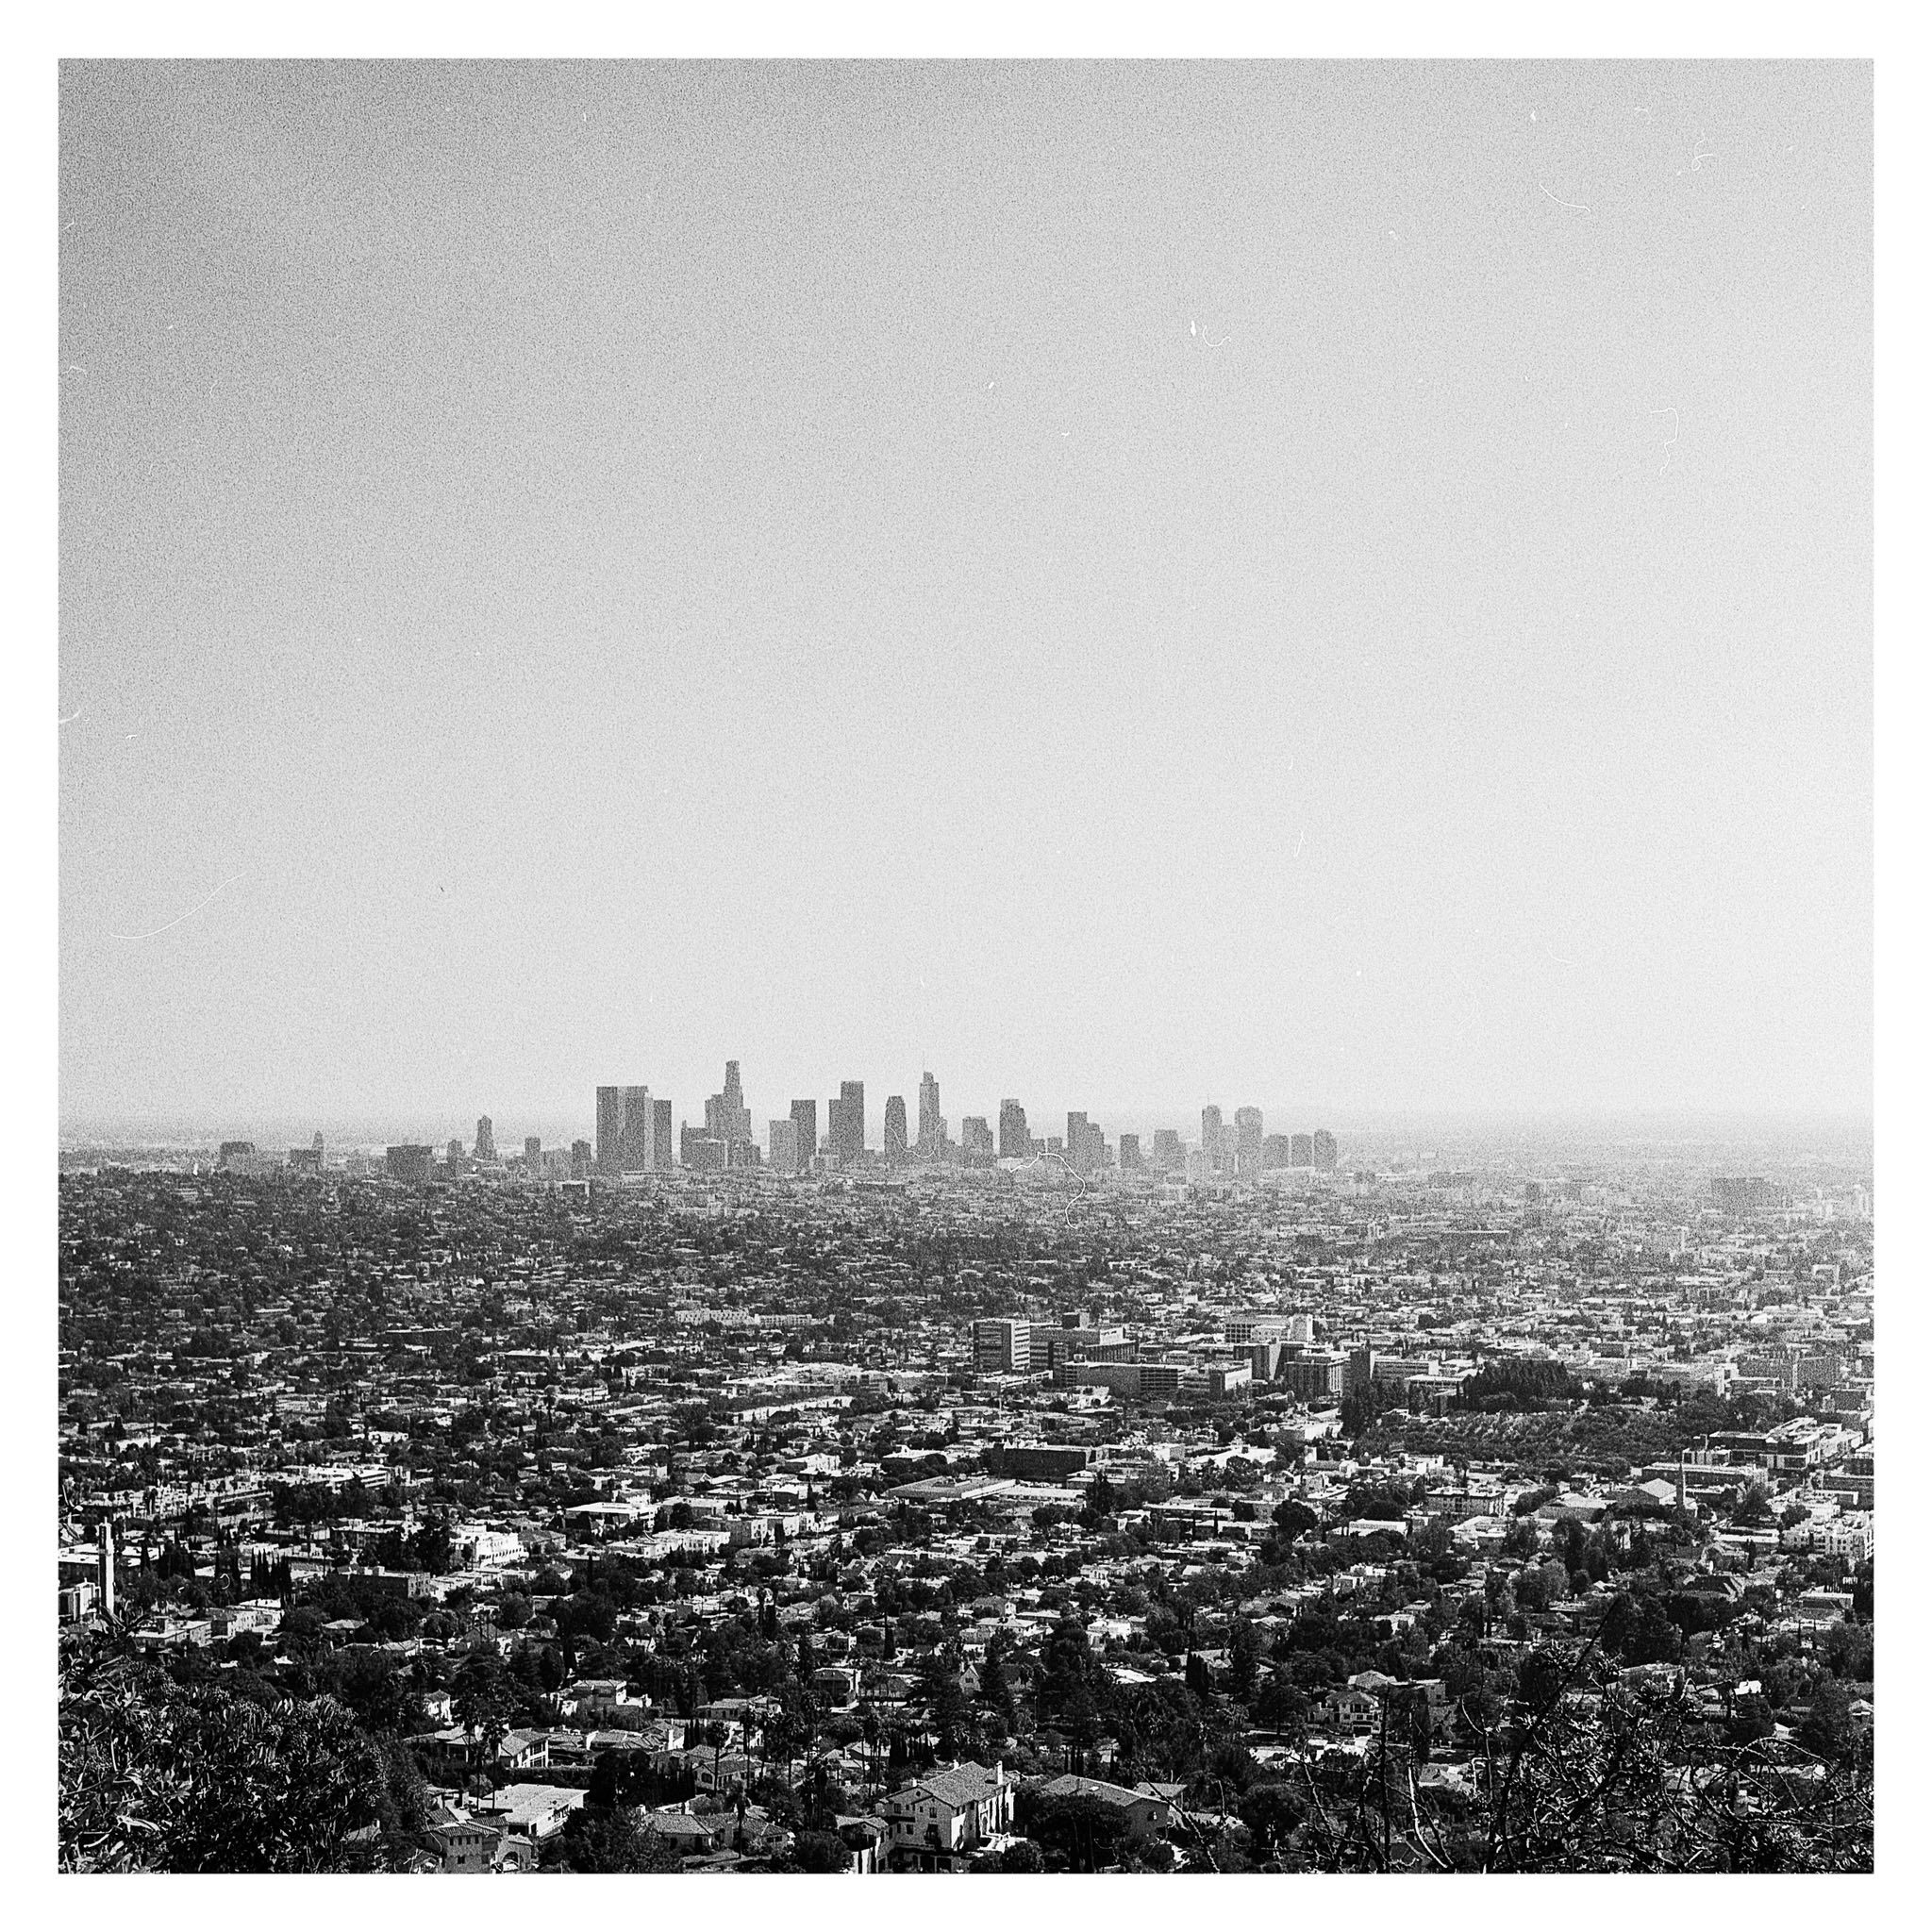 j_harvell Los Angeles taken from Griffith Park. Down at the parlor. Waiting. #ilfordphoto HP5+ #fridayfavourites #softfocus are unavoidable because of dust in the air.